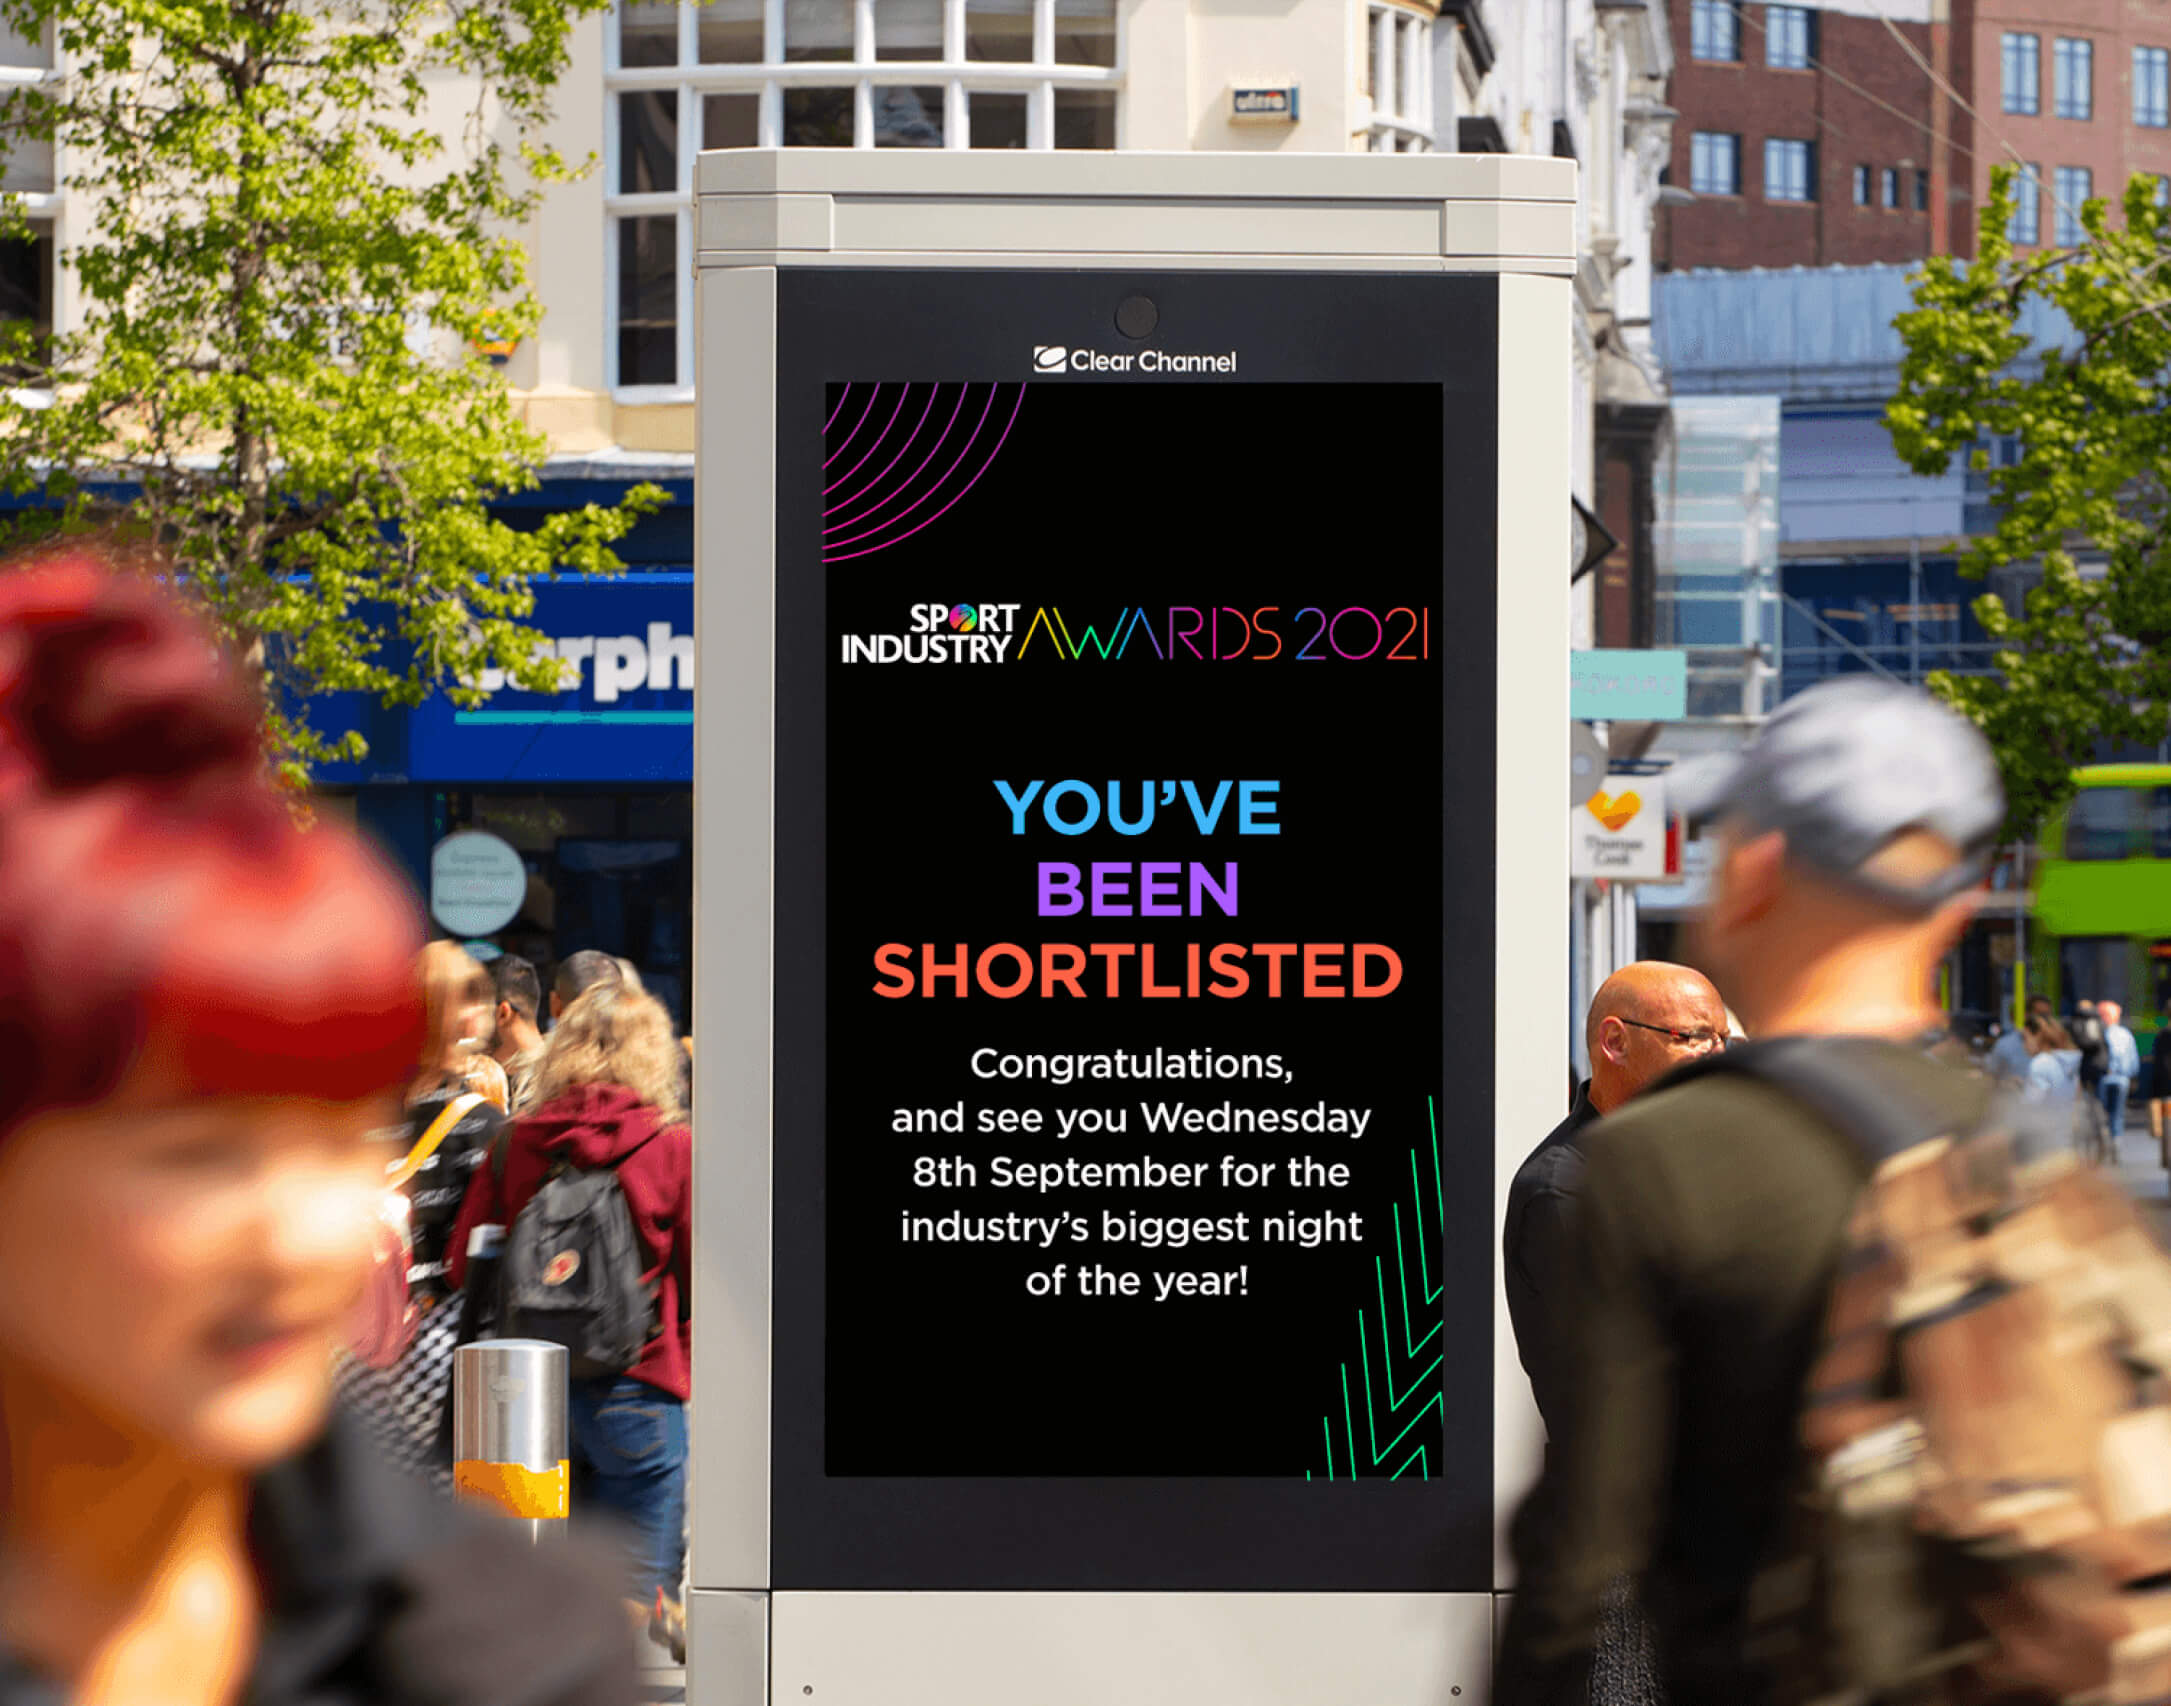 RUGBY LEAGUE WORLD CUP 2021 SHORTLISTED AT THE 2021 SPORT INDUSTRY AWARDS